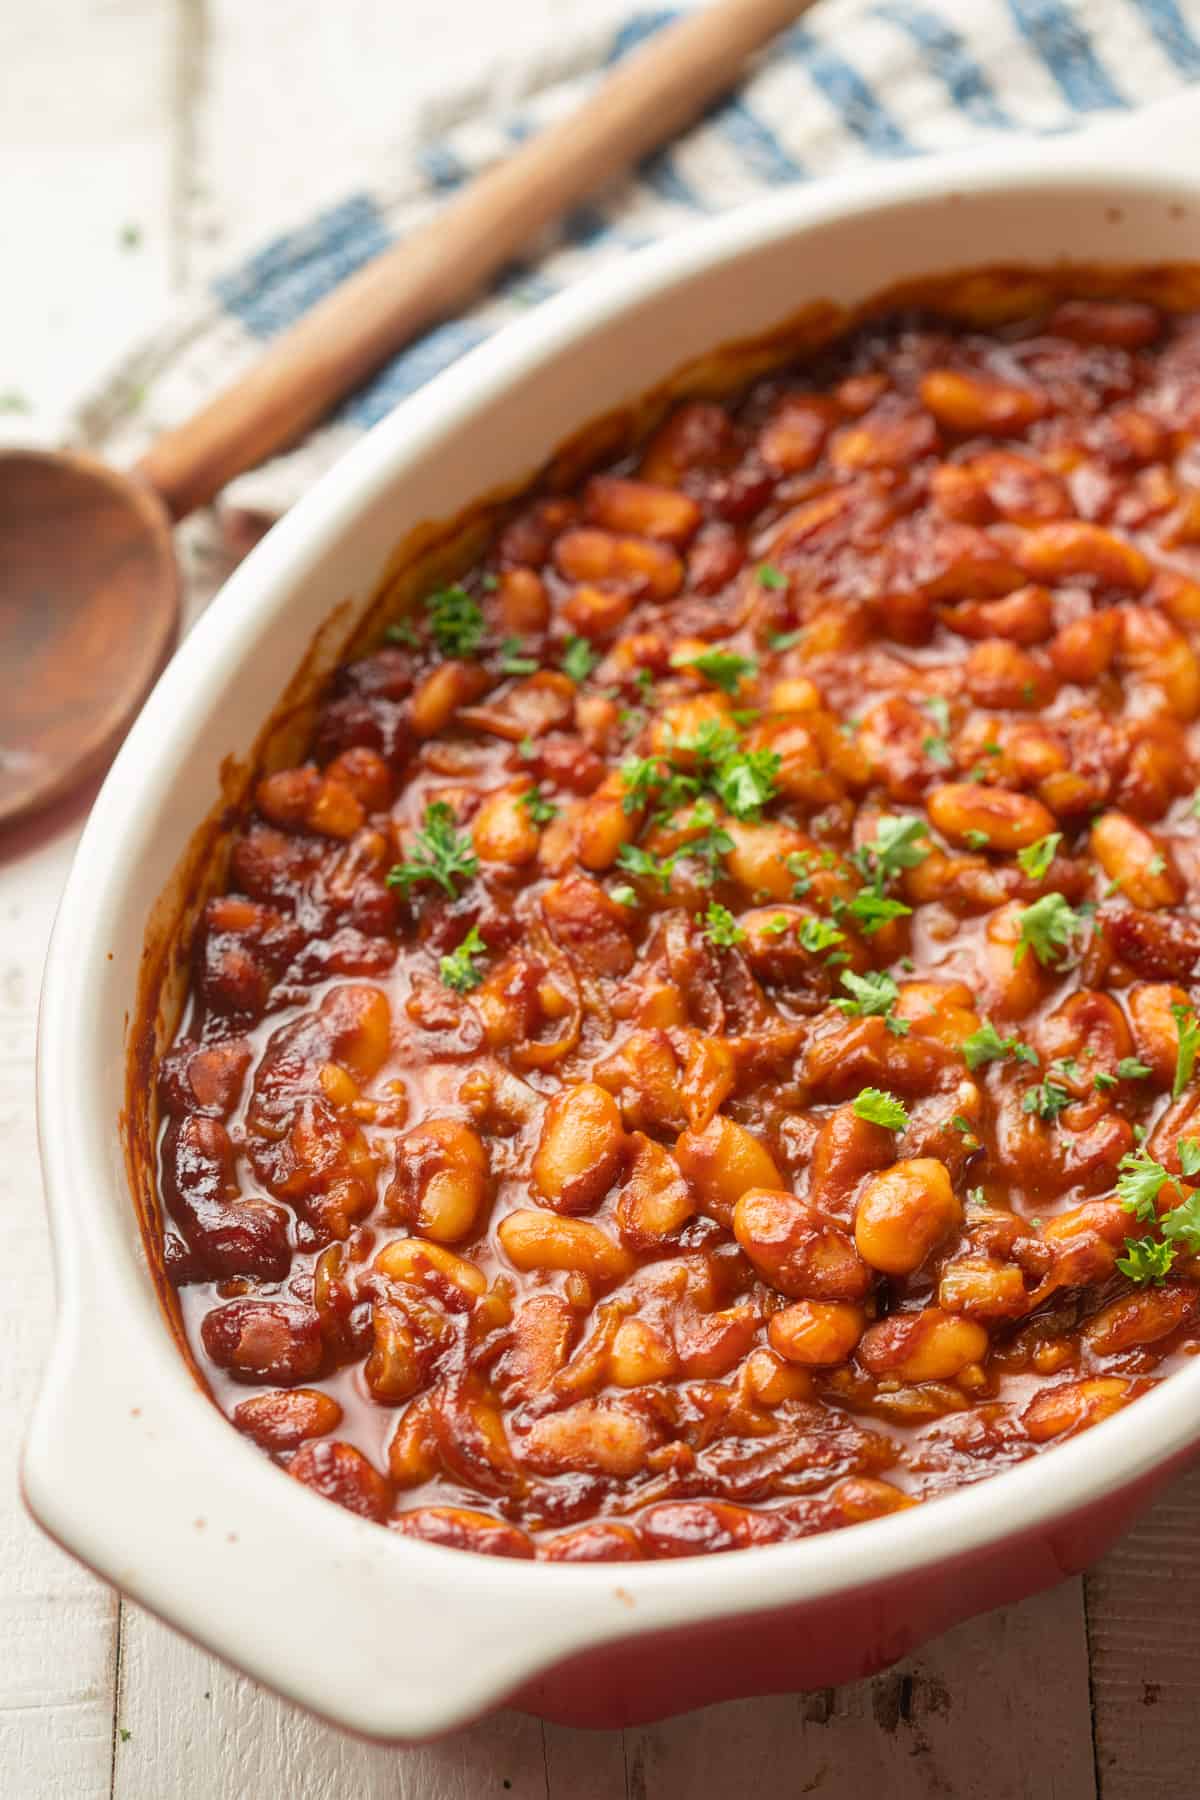 Dish of Vegan Baked Beans with wooden spoon and striped napkin in the background.